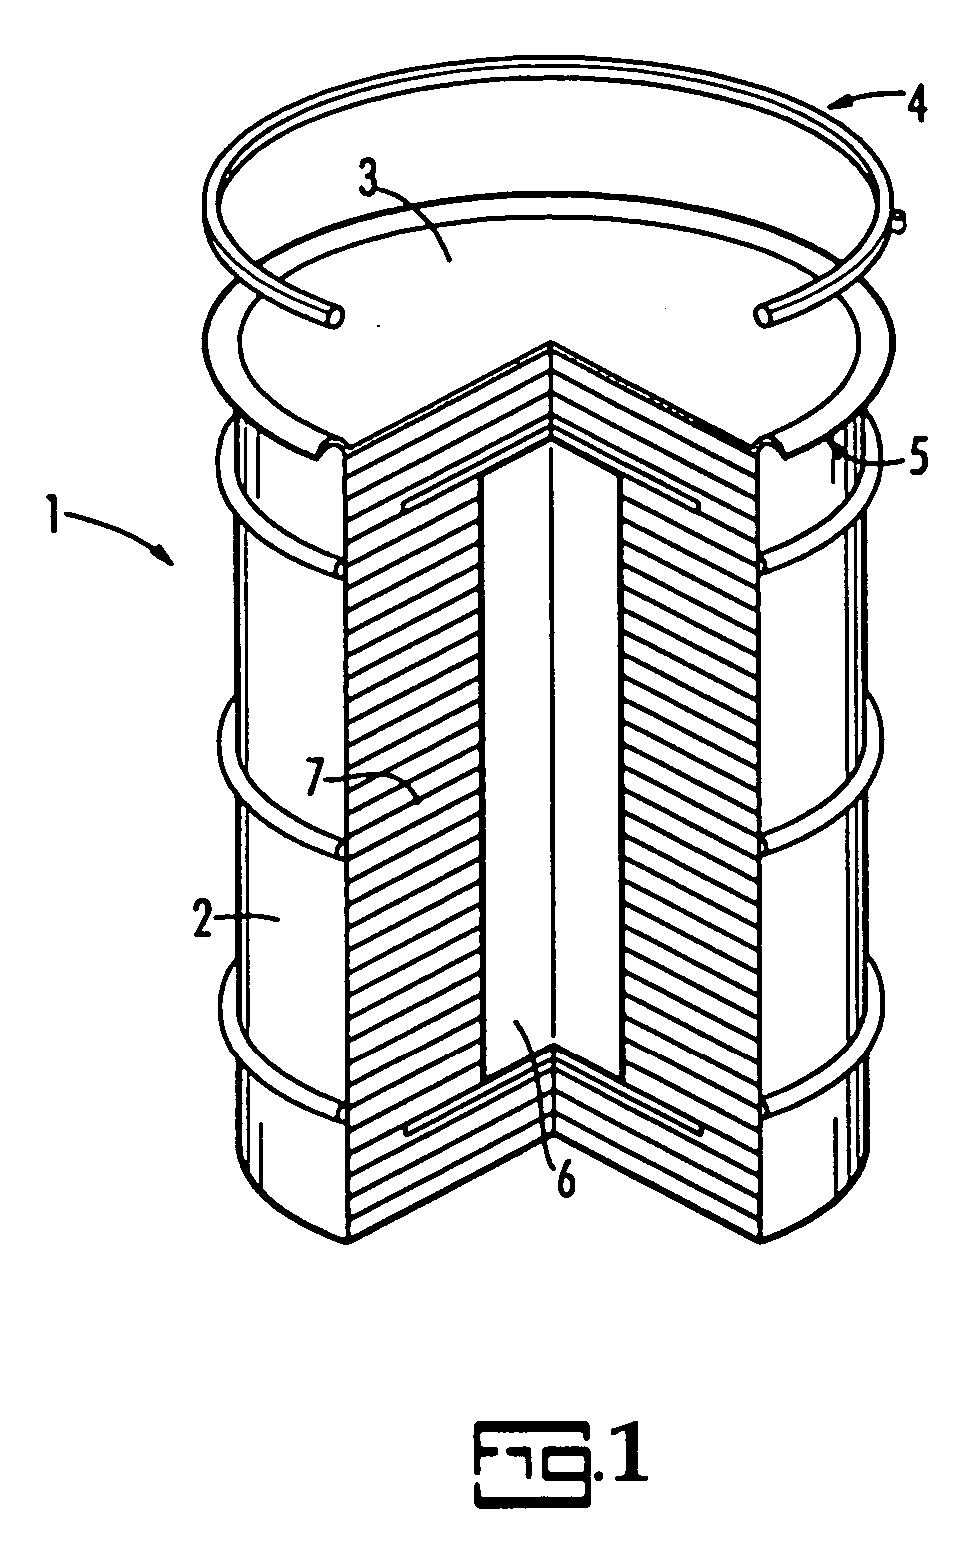 Clamshell closure for metal drum